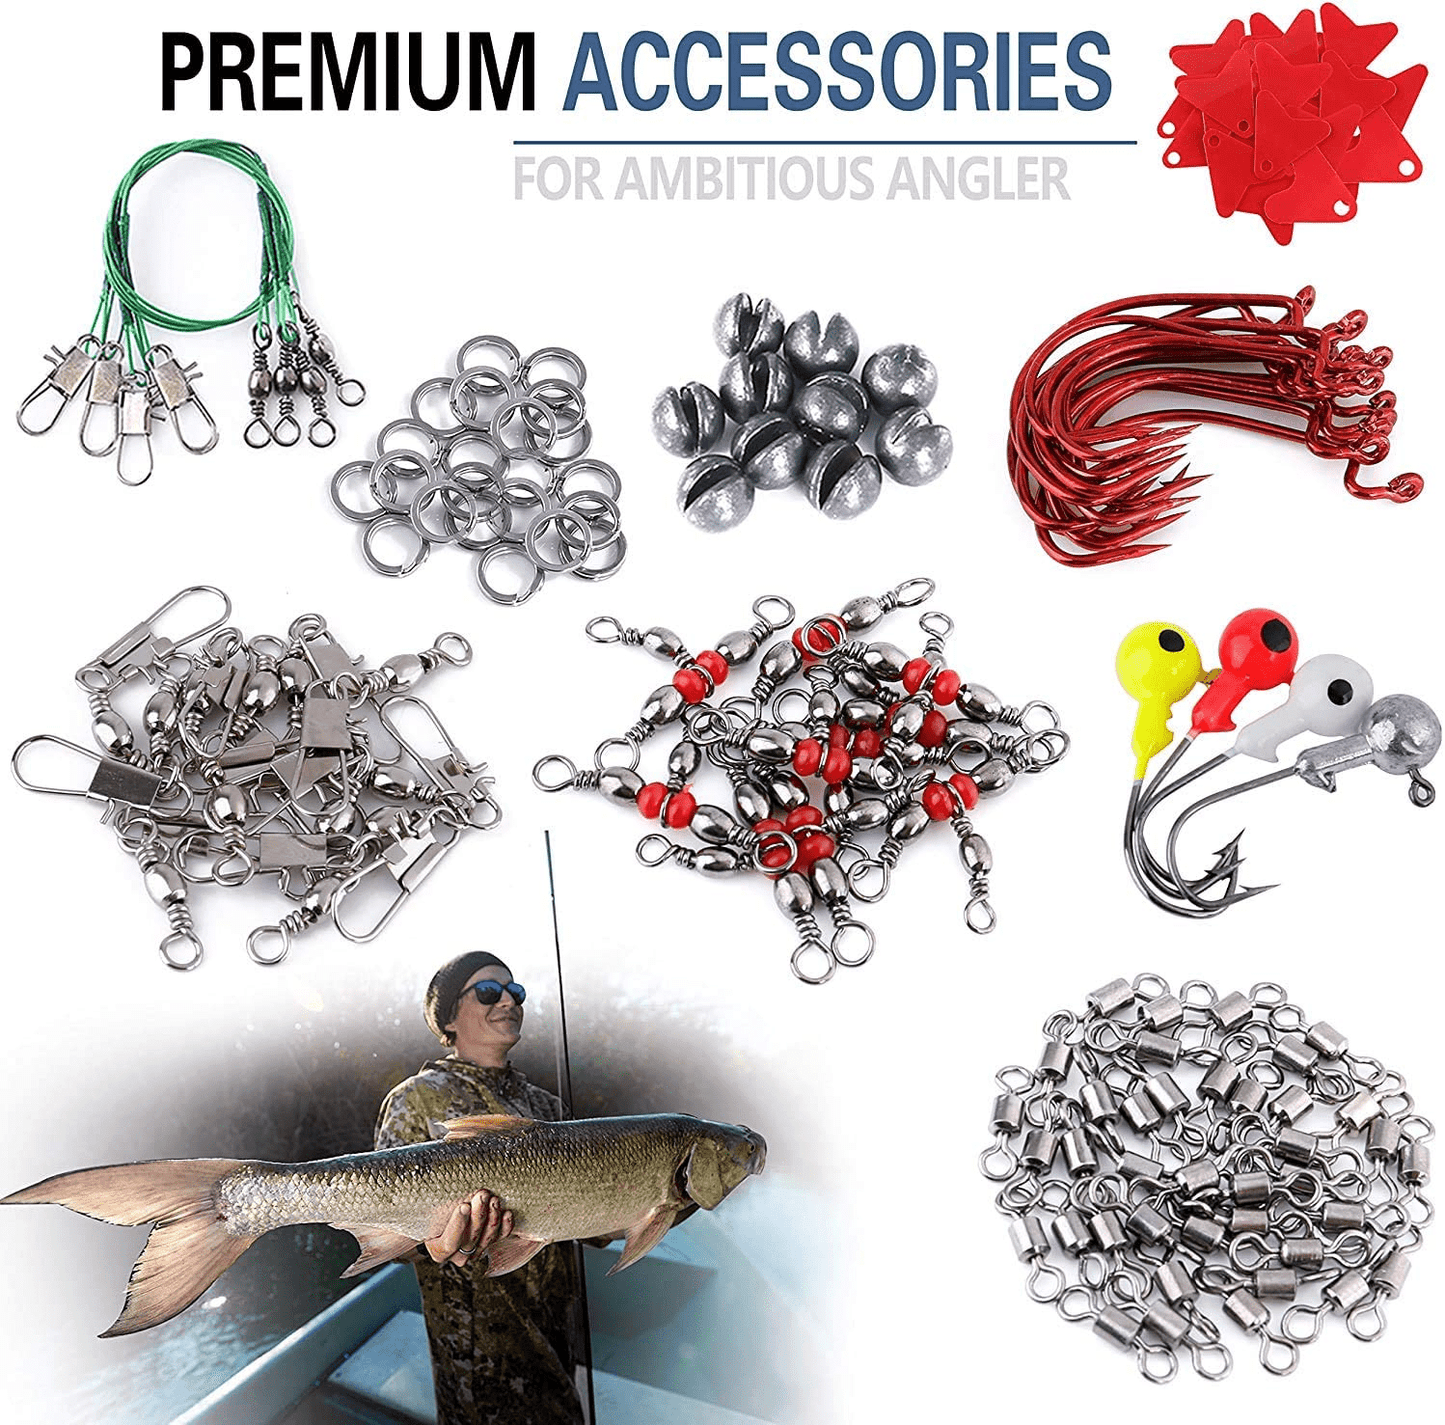 PLUSINNO Fishing Accessories Kit, Fishing Tackle Kit with Tackle Box Including Fishing Weights Sinkers, Jig Hooks, Beads, Swivel Snap, Bobbers Float, Saltwater Freshwater Fishing Gear